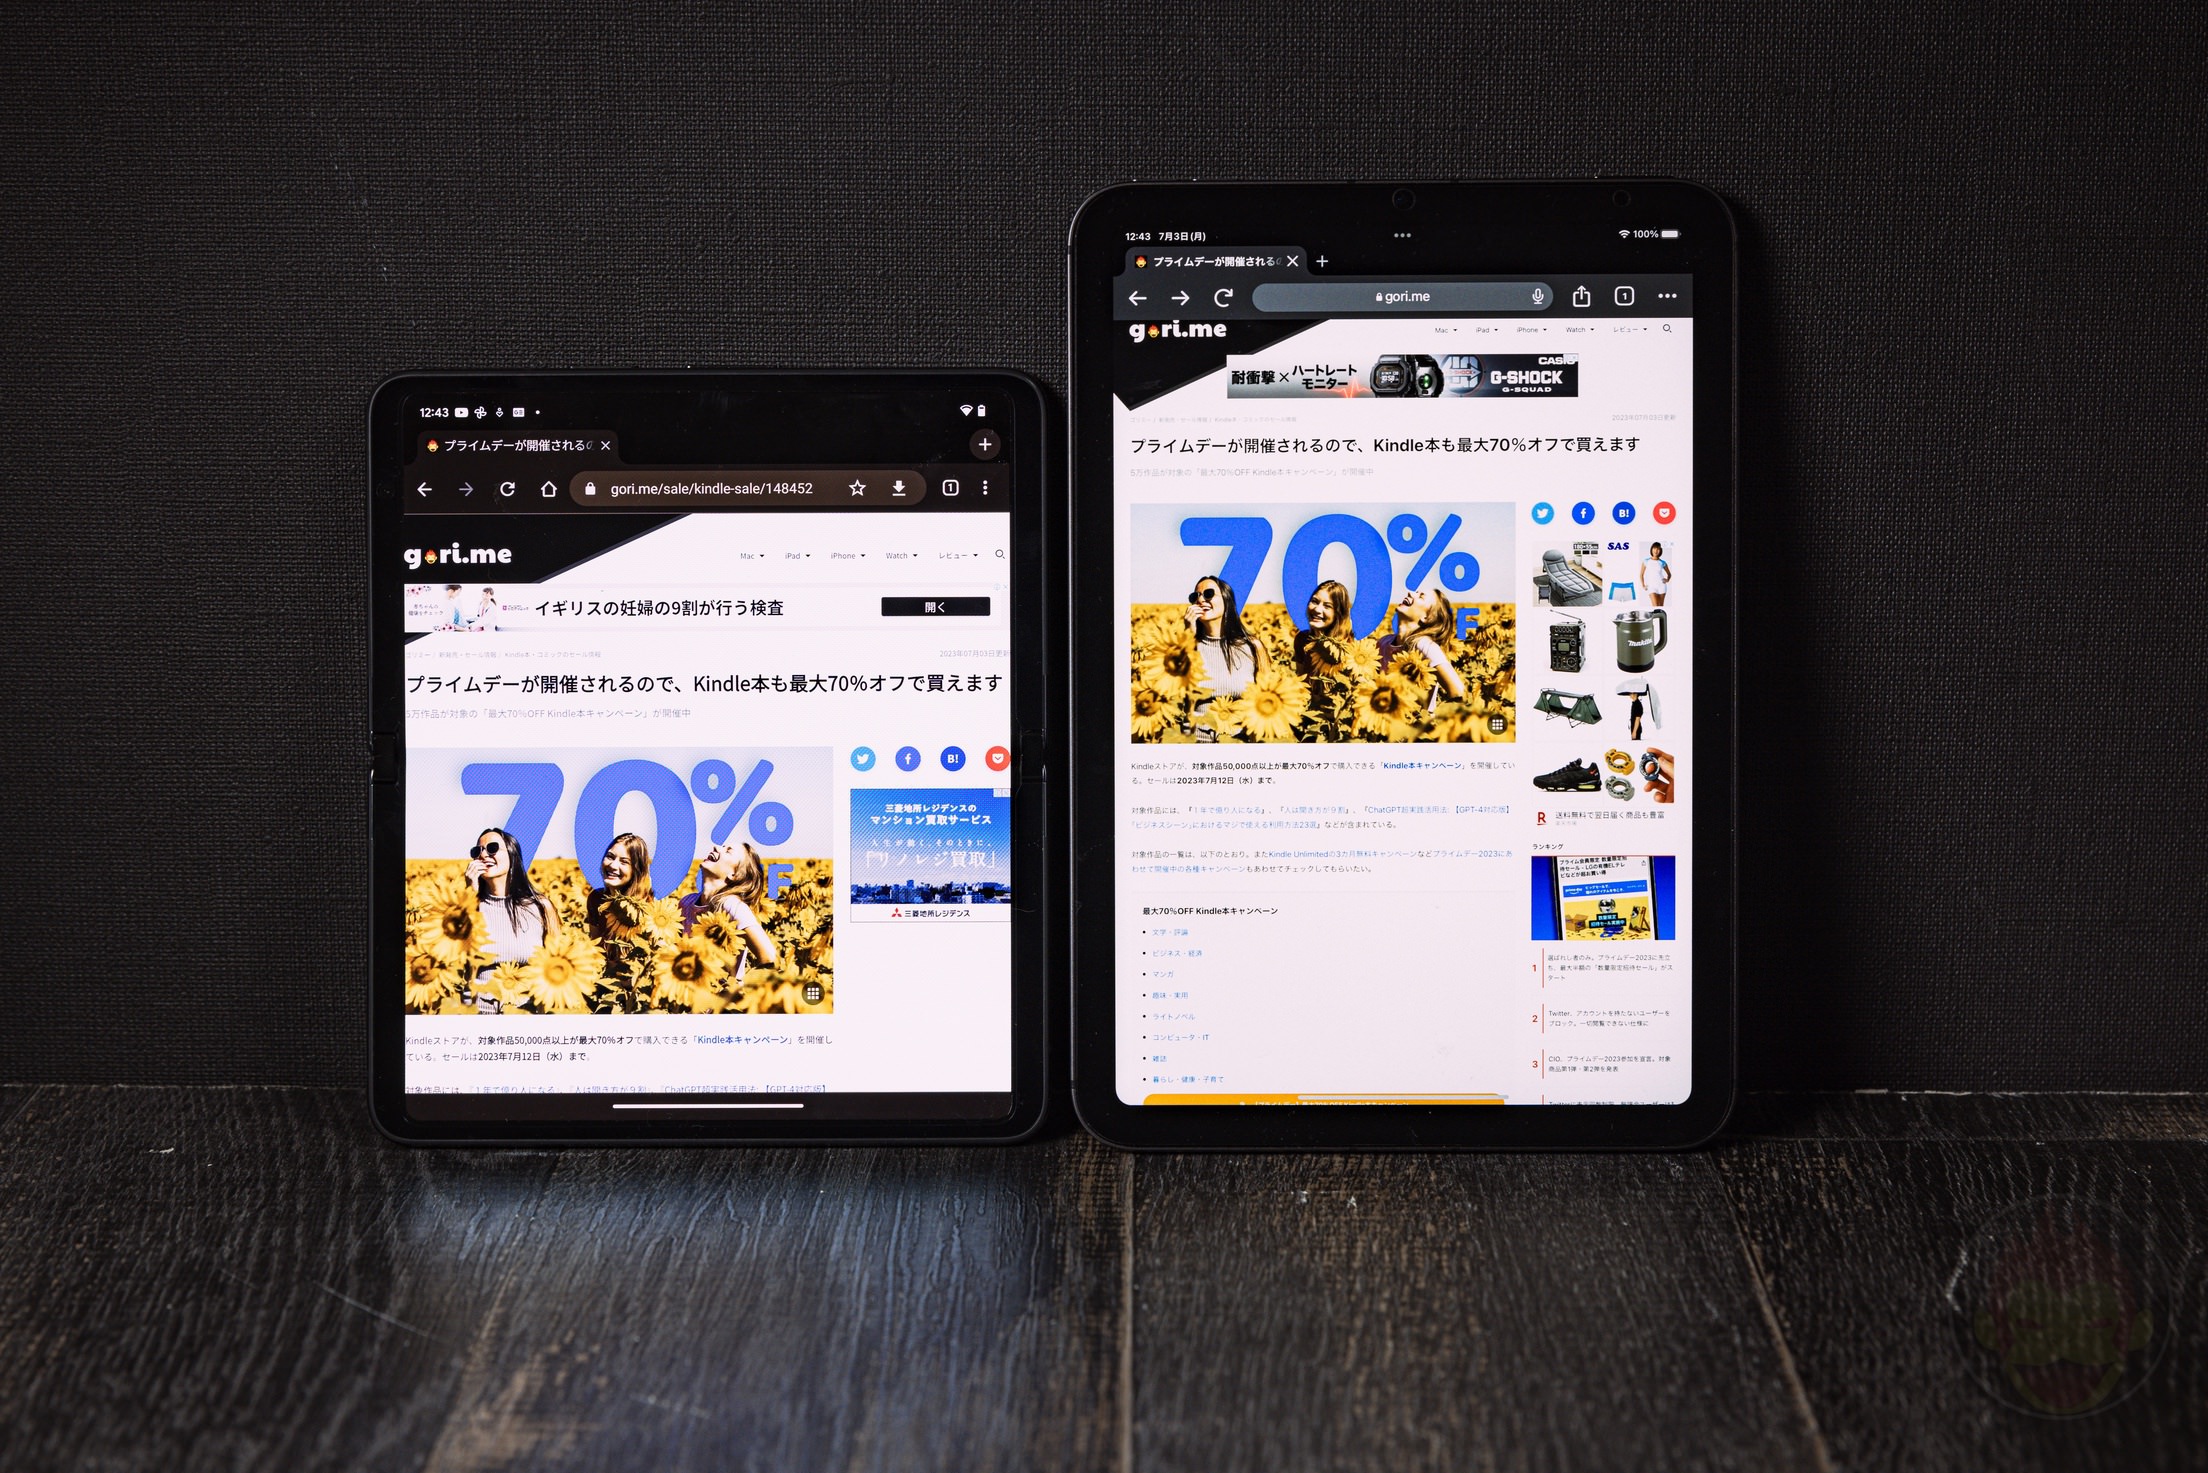 Google-Pixel-Fold-at-home-comparing-with-other-products-10.jpg